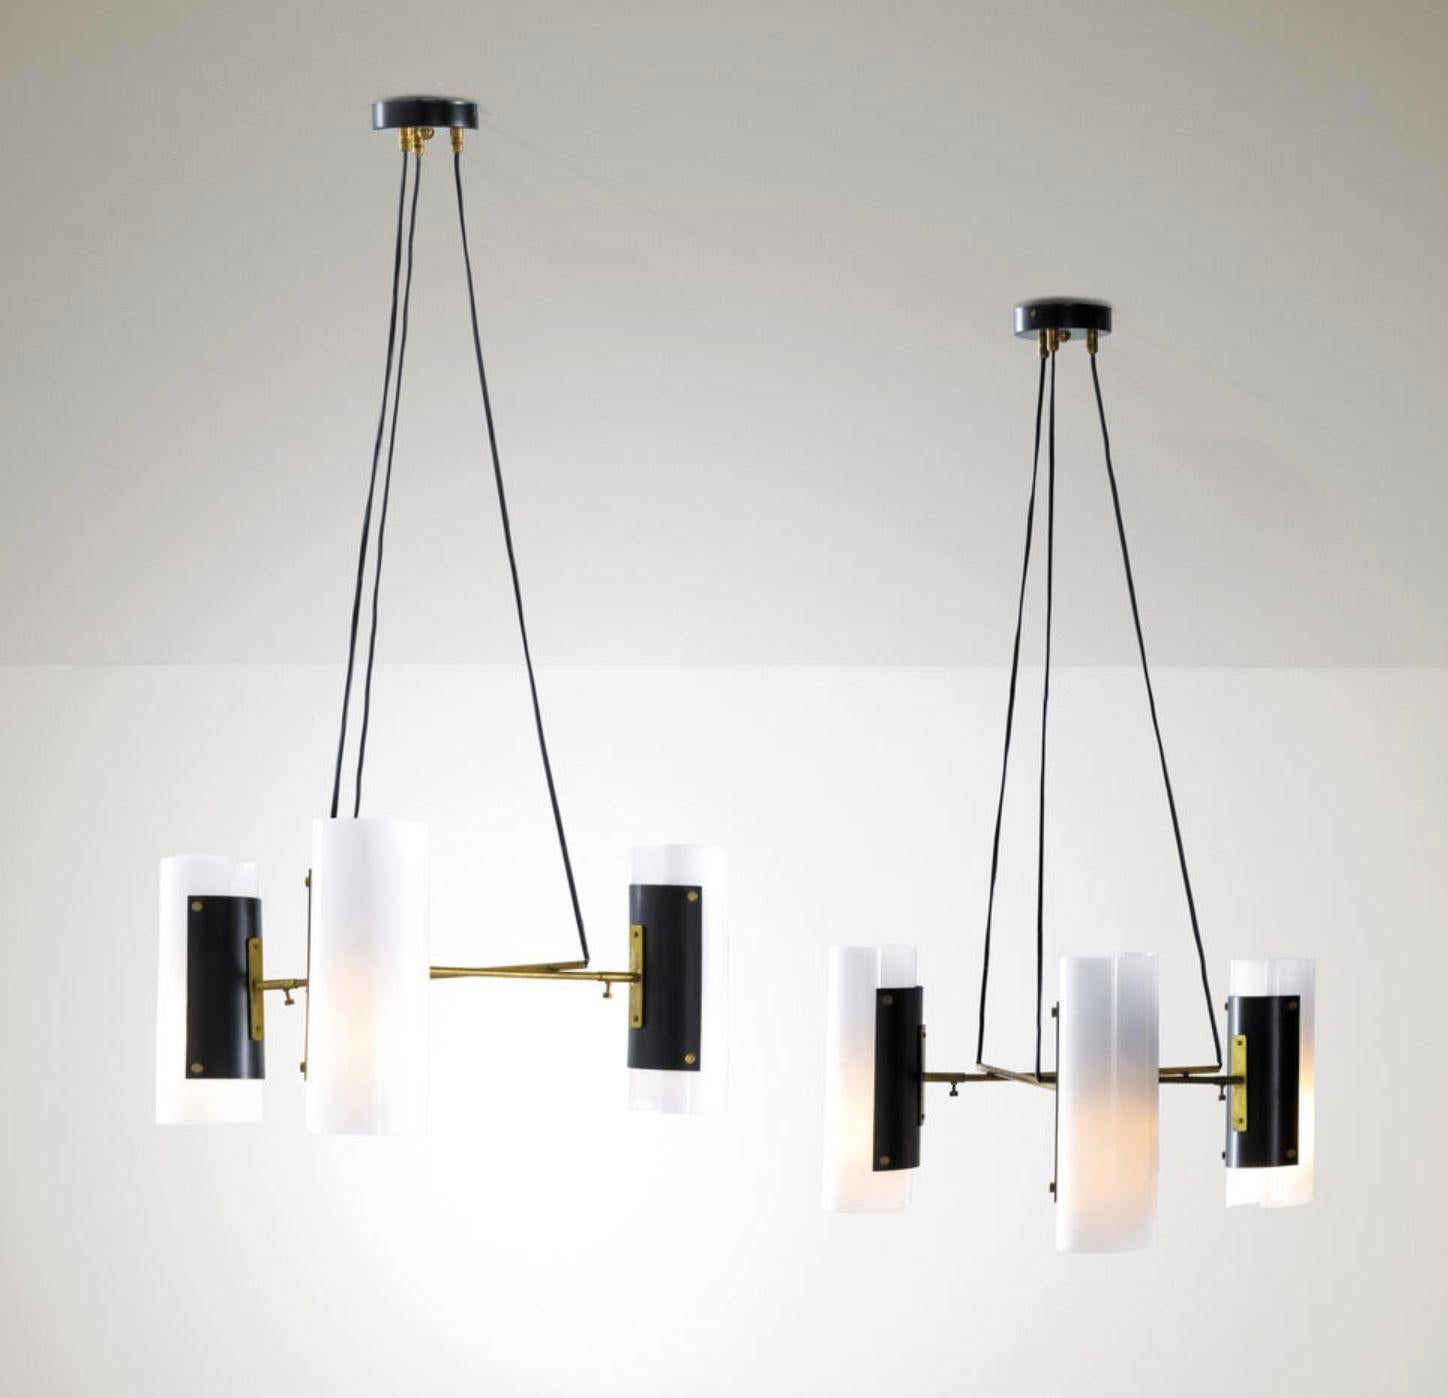 Pair of vintage light pendants by Stilux, Italy, c. 1960's. They each consist of a brass and lacquered metal frames and white glass pieces.
*Rewired to fit US lighting standard
Dimensions:
43.25